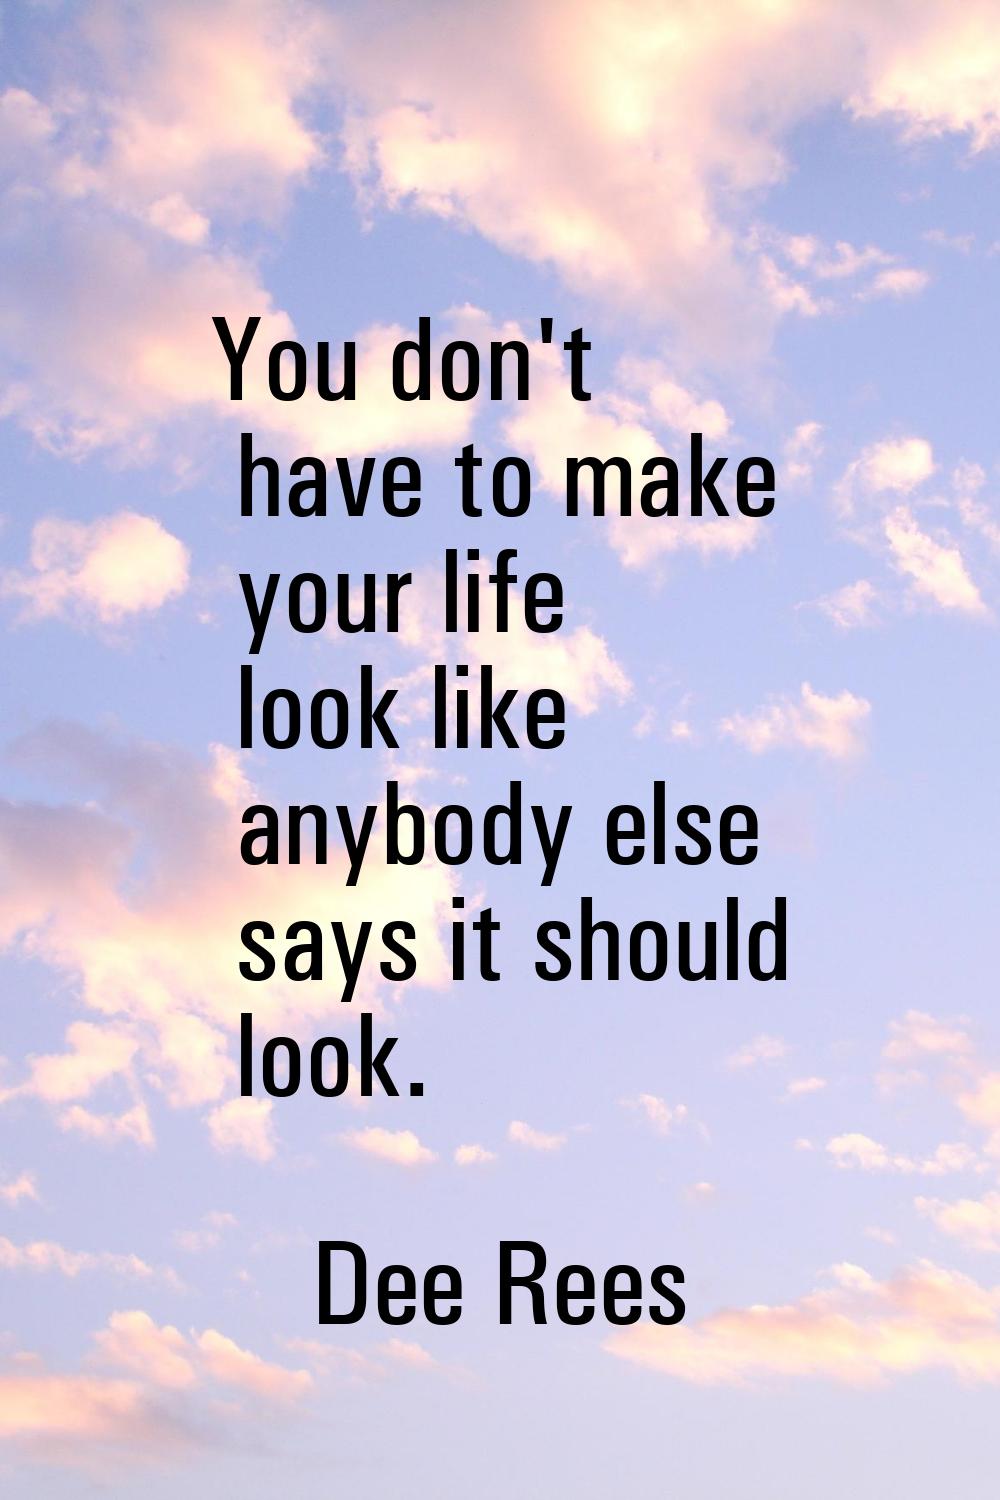 You don't have to make your life look like anybody else says it should look.